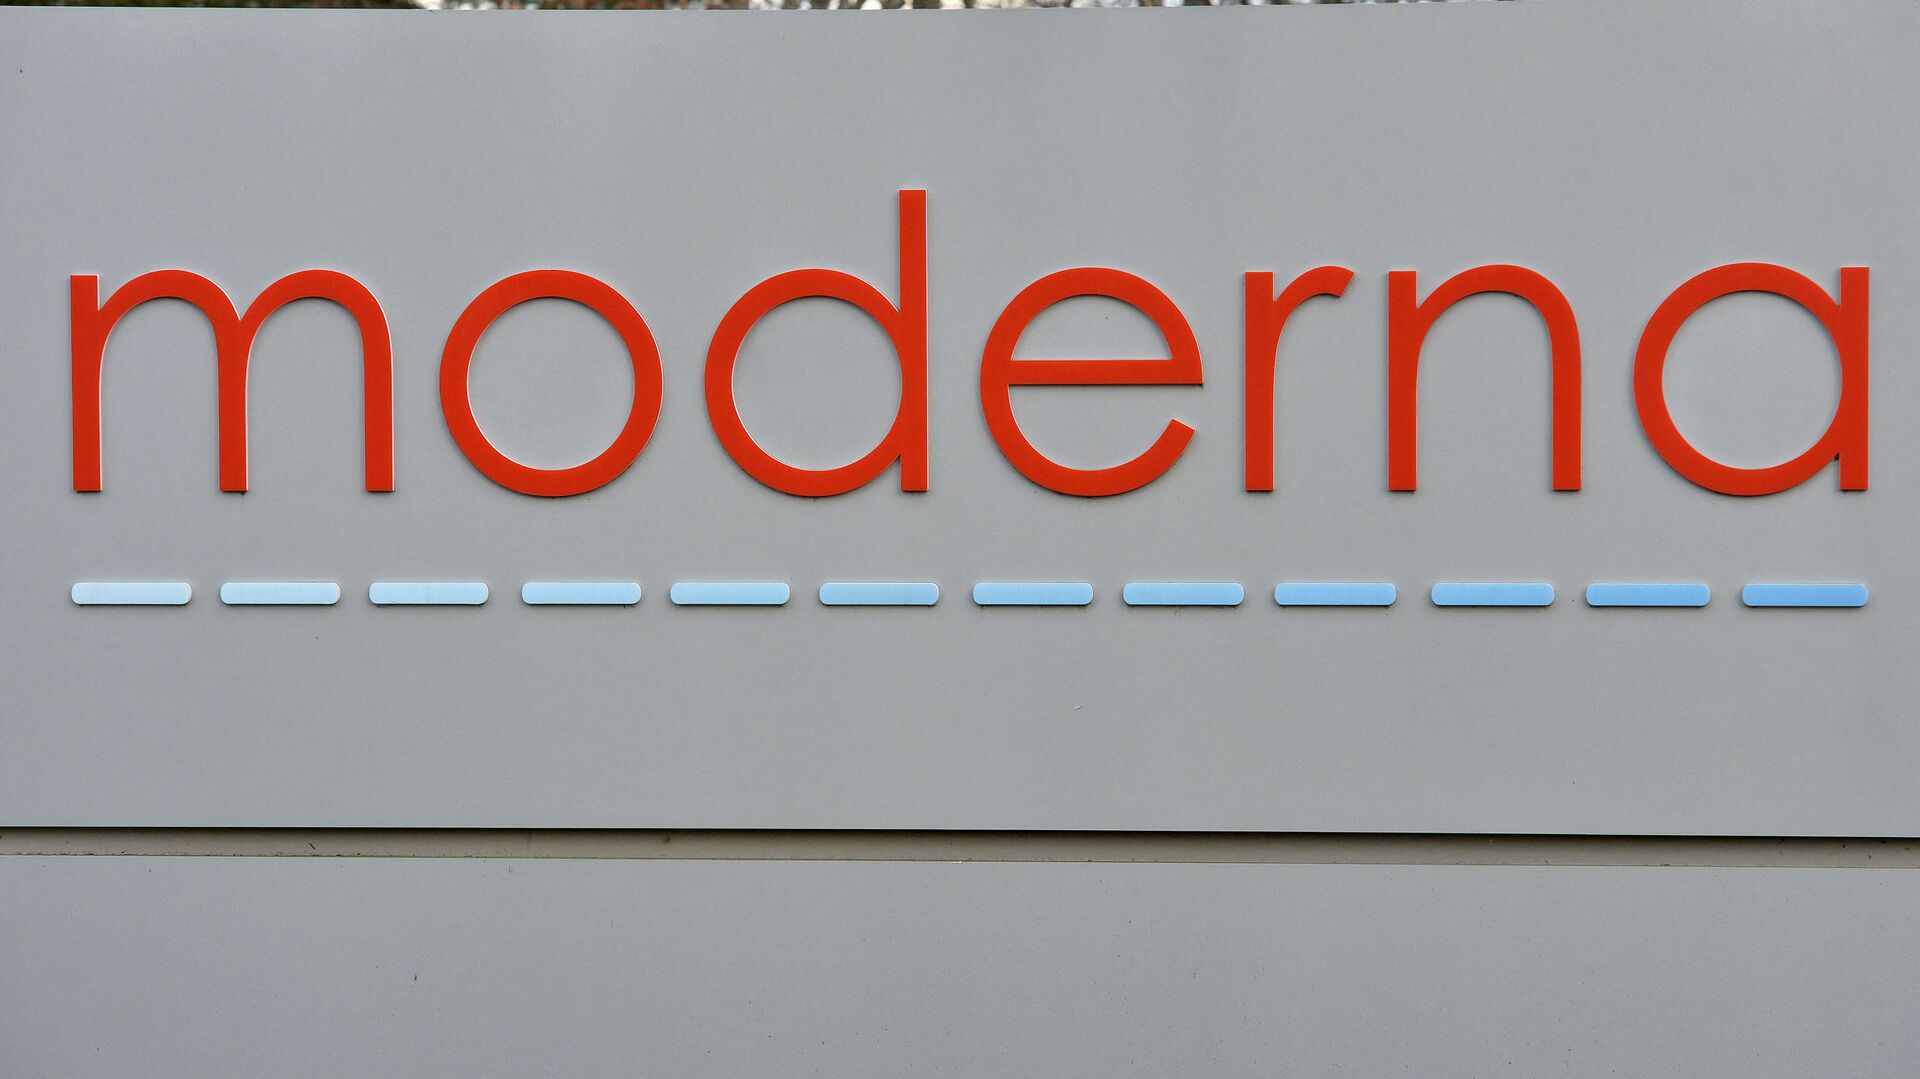 In this file photo the Moderna logo is seen at the Moderna campus in Norwood, Massachusetts on on December 2, 2020, where the biotechnology company is mass producing its Covid-19 vaccine. - US biotech firm Moderna said on July 7, 2021 it had dosed its first participants in a human study of an mRNA vaccine that targets multiple strains of influenza. The company intends to recruit 180 adults in the United States for the Phase 1/2 portion of the trial to evaluate the safety and strength of immune response to the shot, called mRNA-1010. - Sputnik International, 1920, 18.03.2022